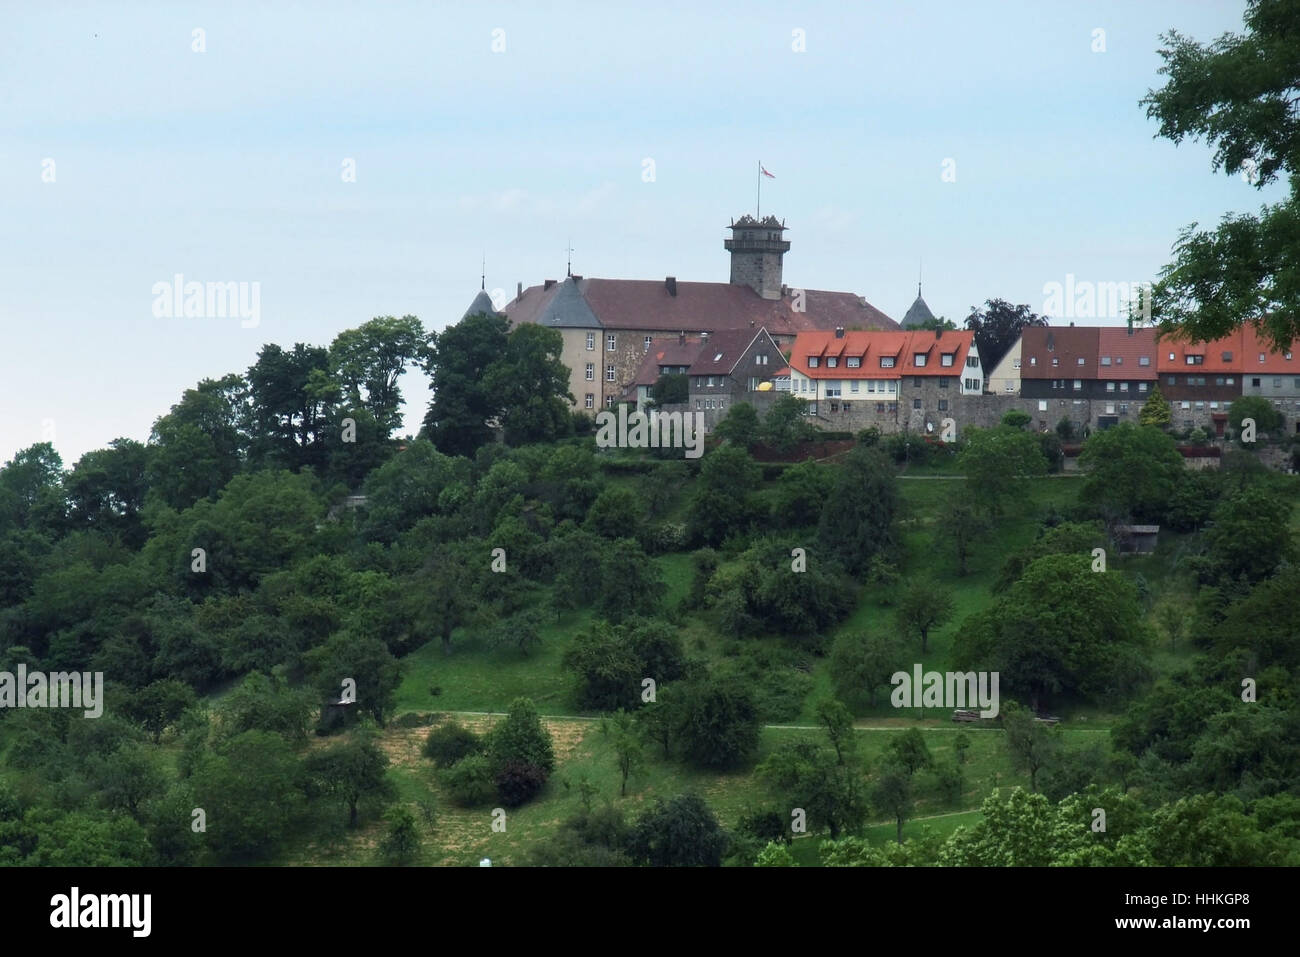 Waldenburg, a small town in Hohenlohe (Southern Germany) at summer time Stock Photo